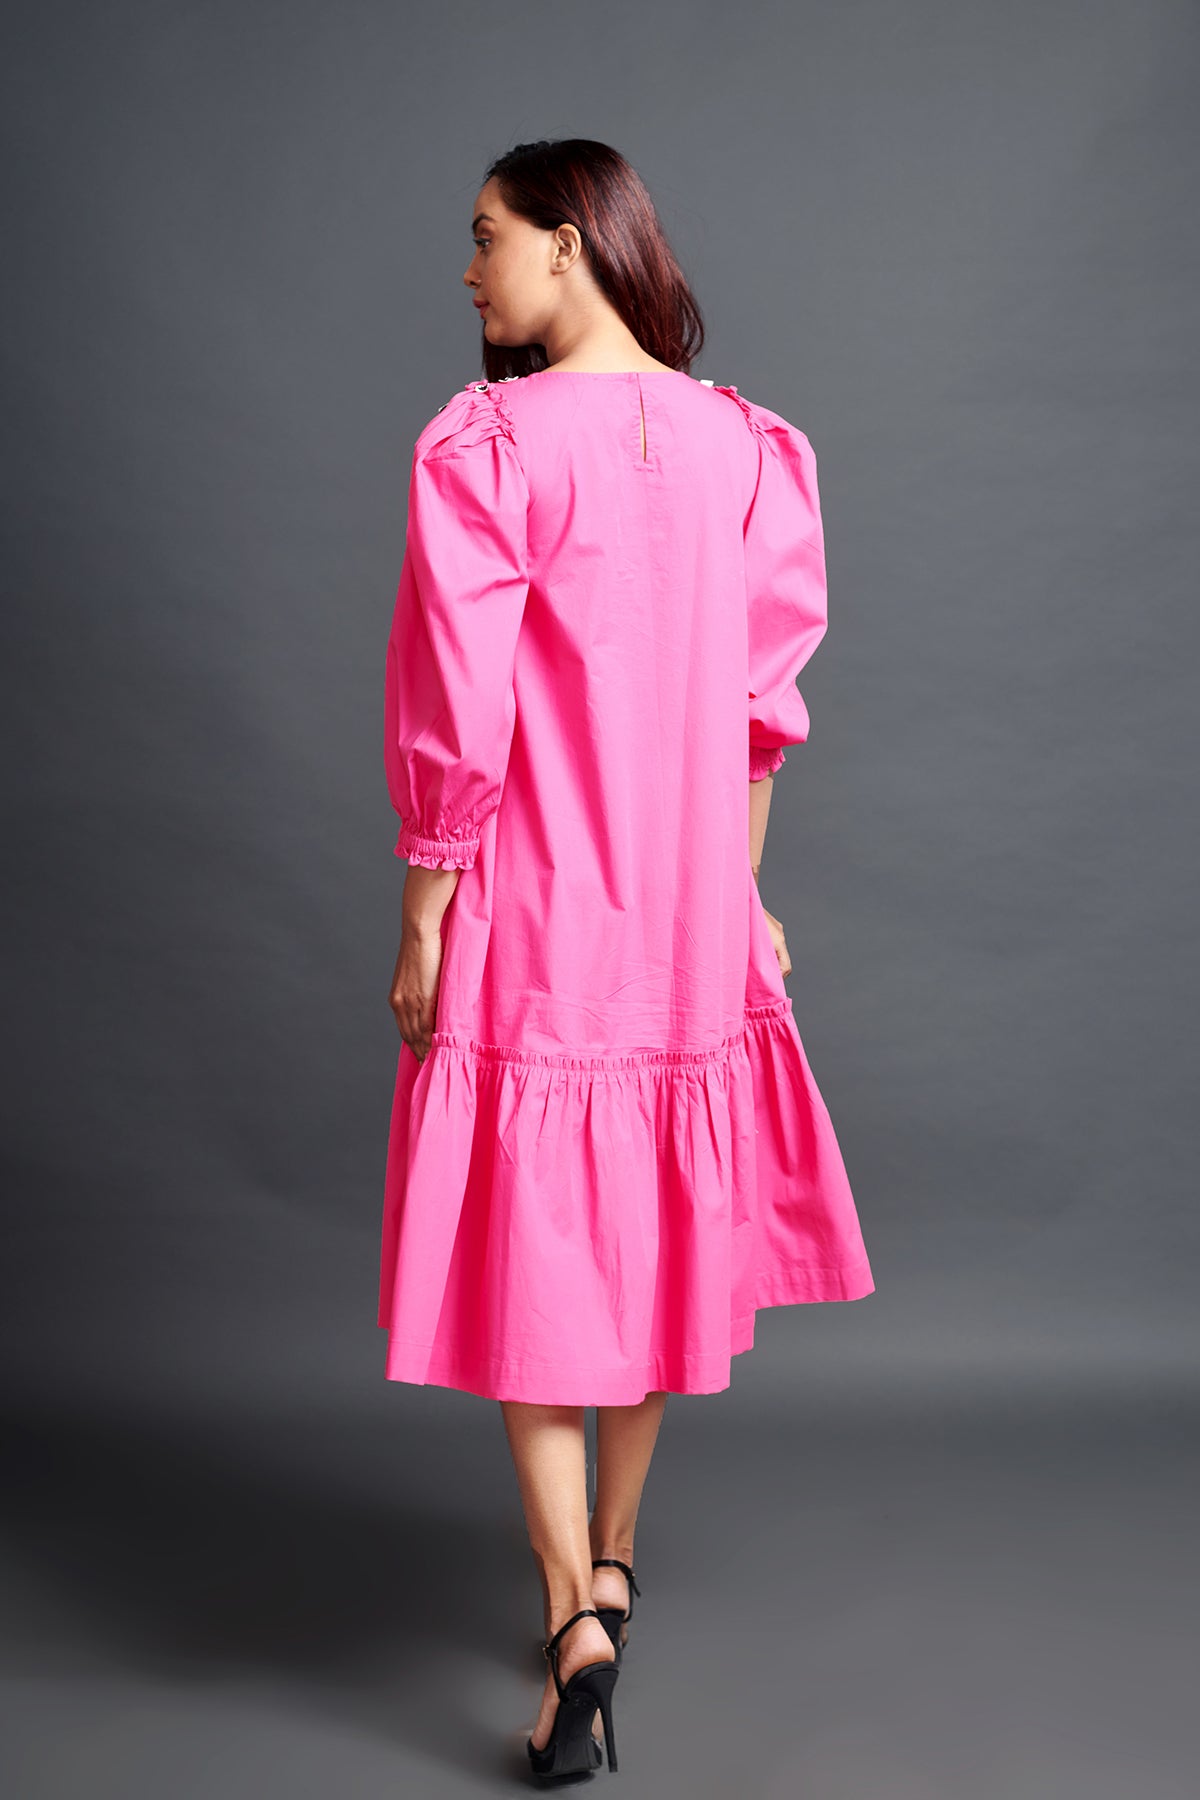 Image of PINK GATHERED HEM DRESS IN COTTON BASE WITH CUTWORK EMBROIDERY. From savoirfashions.com